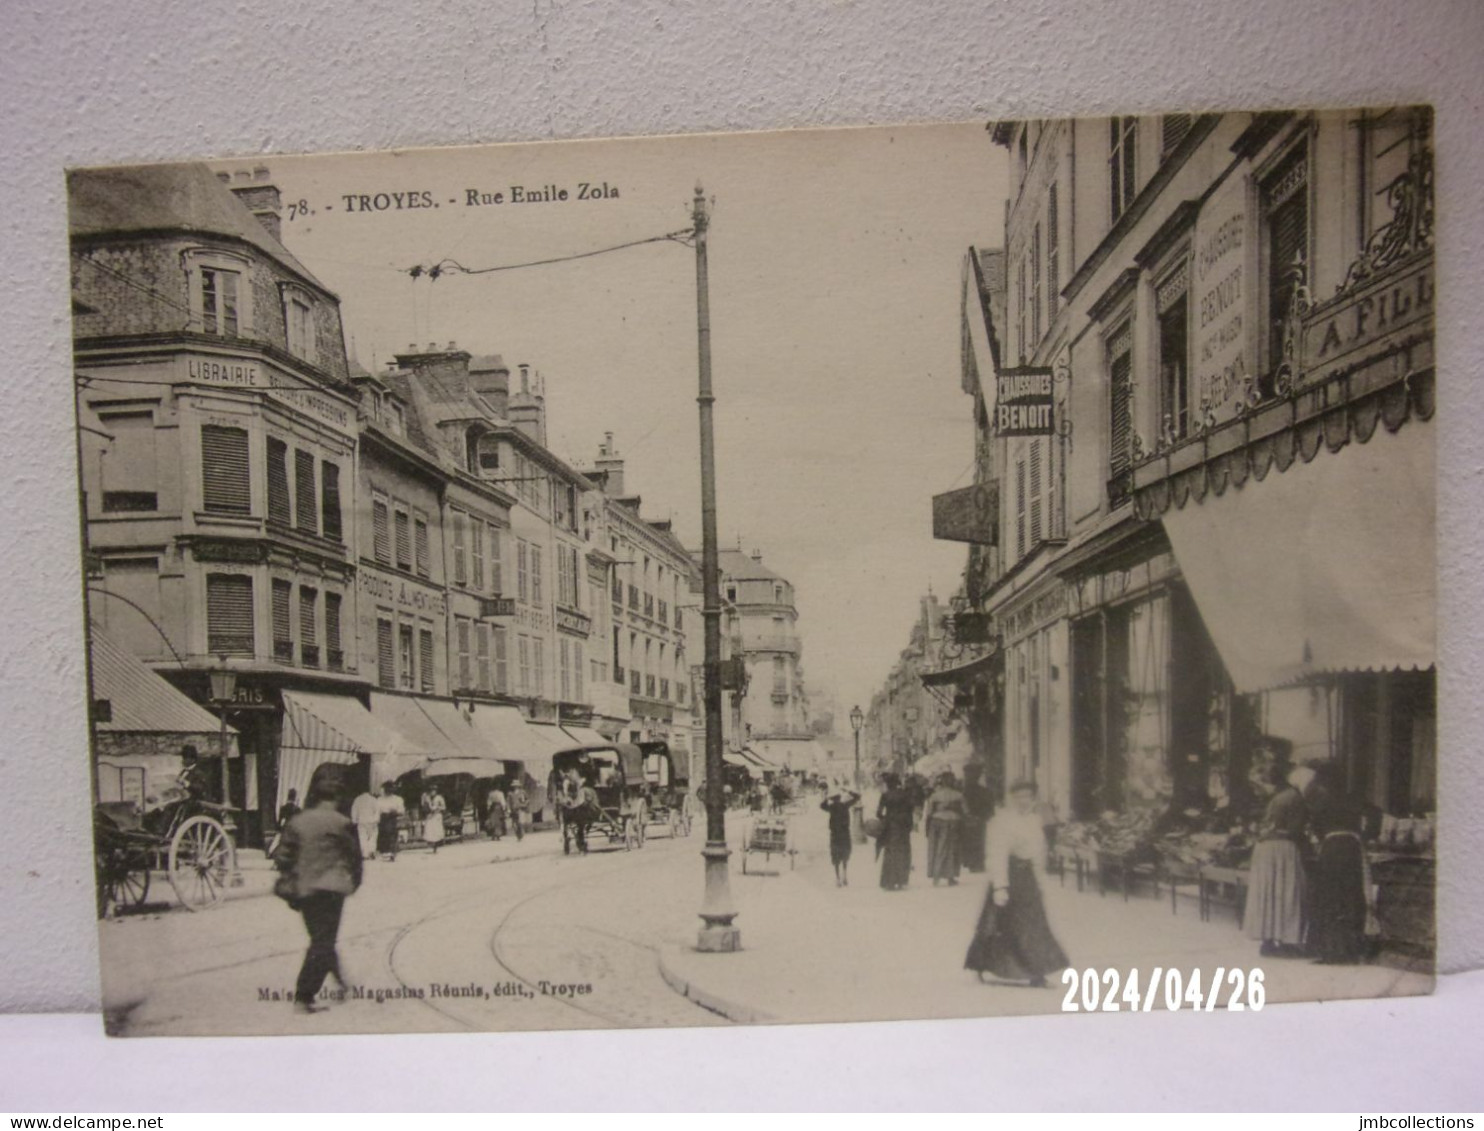 TROYES (Aube) RUE EMILE ZOLA MAGASINS VERSO COUREUR N°78 - Troyes